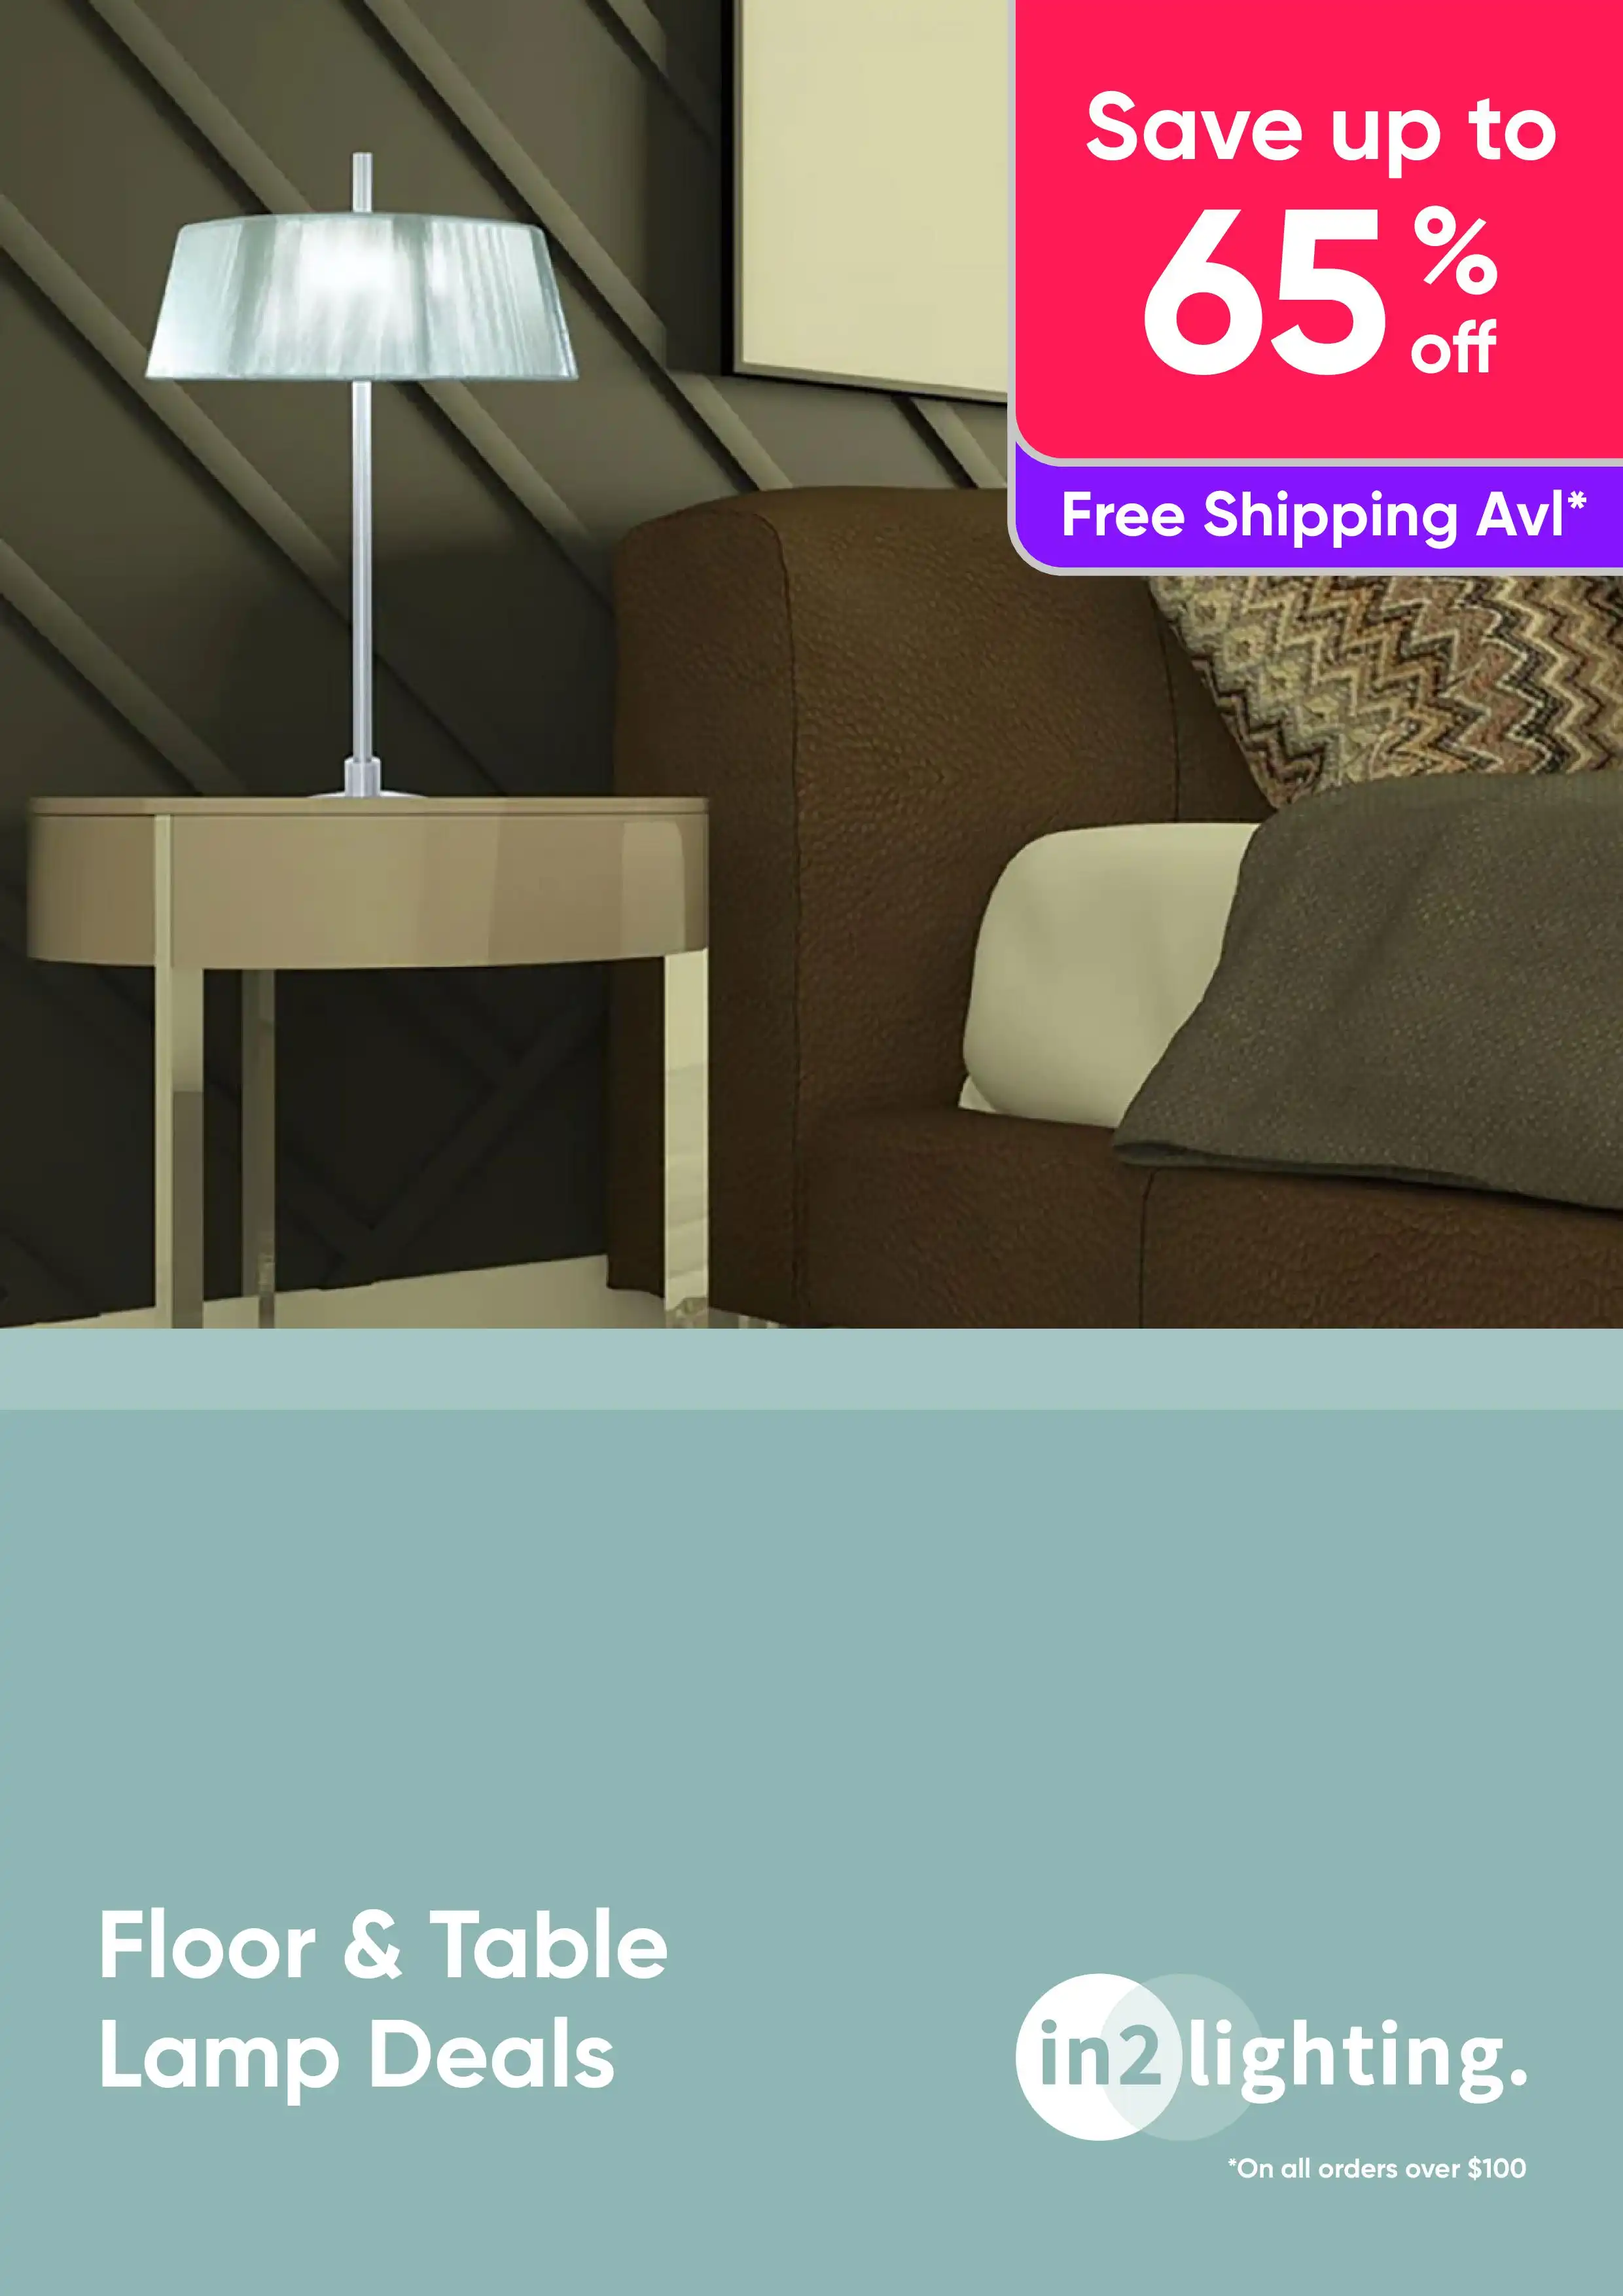 Floor and Table Lamp Deals - Save Up to 65%